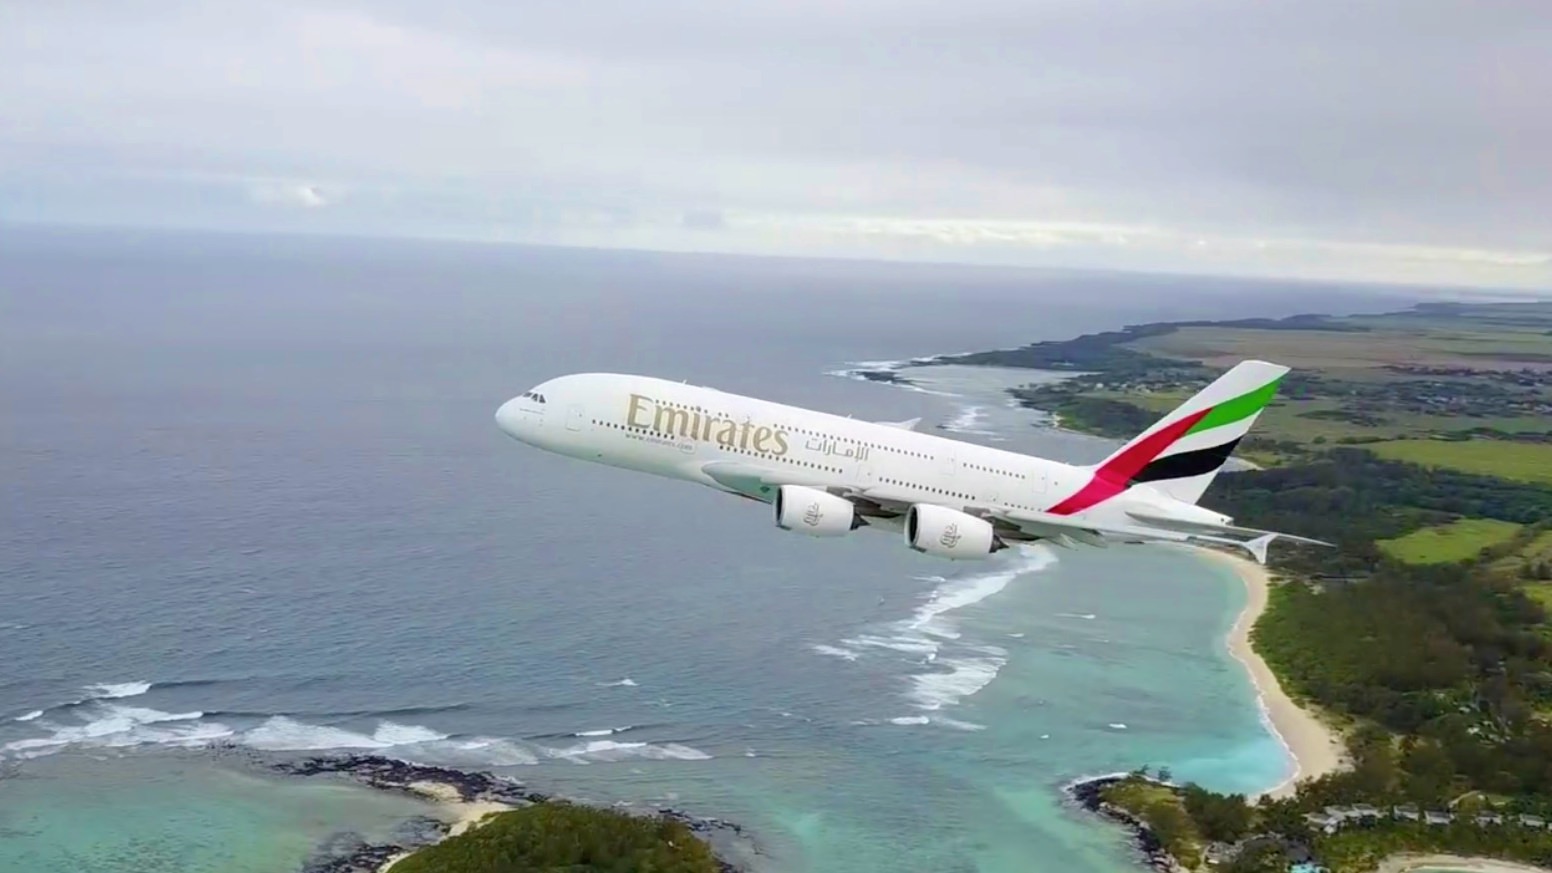 What on earth is this guy thinking flying his drone next to an A380 taking of from Mauritius